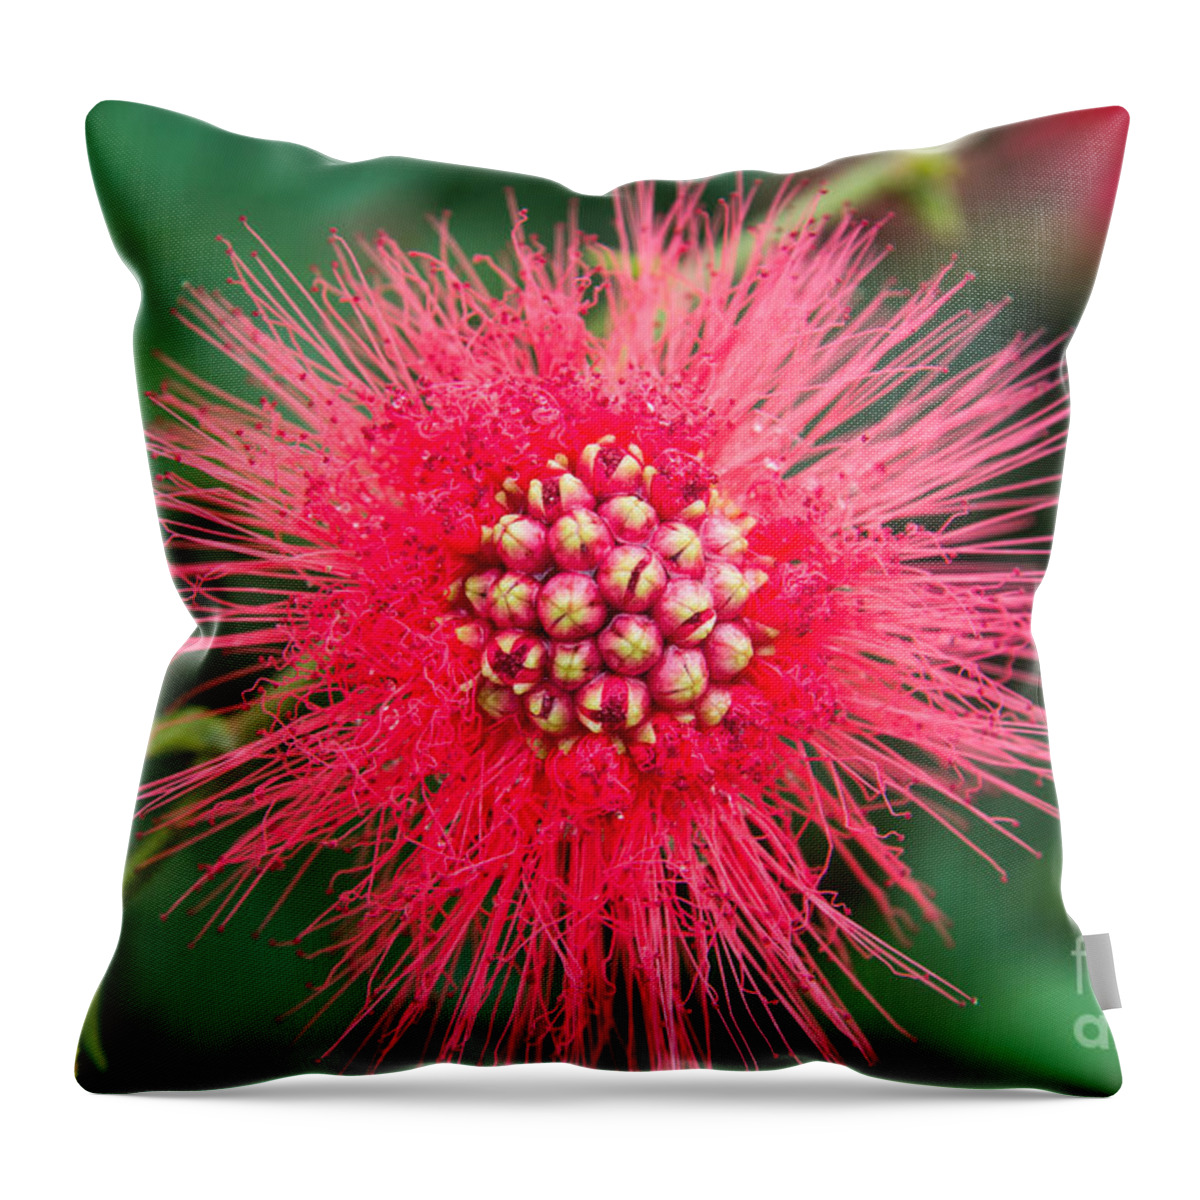 Red Powder Puff Photgraphic Images Throw Pillow featuring the photograph Bad Hair Day by Mary Lou Chmura